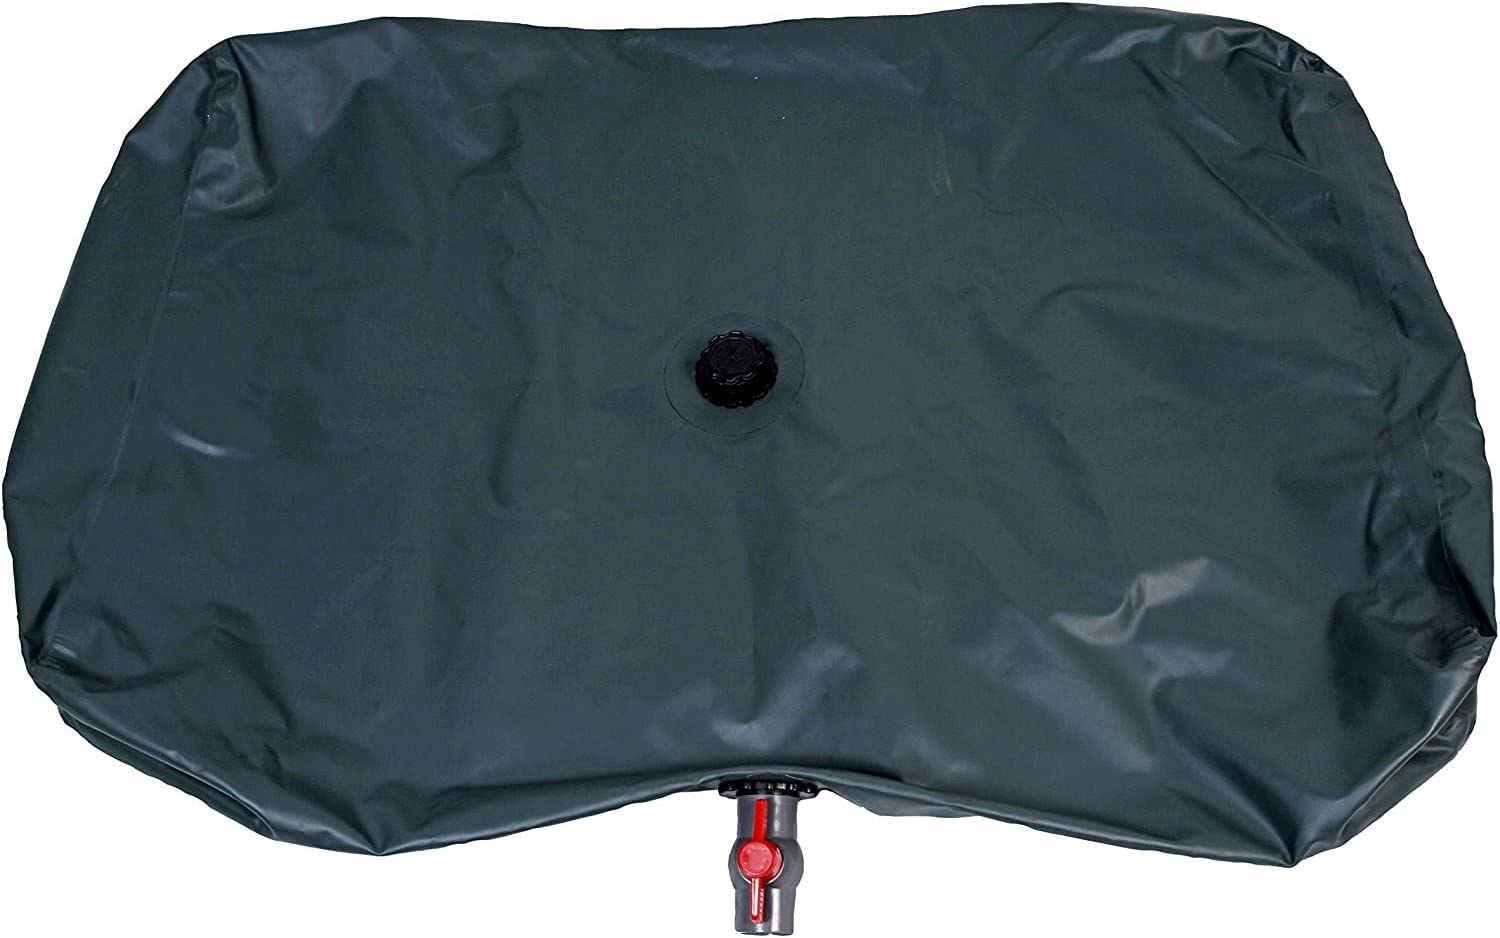 Ivy Bag Portable Water Reservoir, 100 Gallon Storage Capacity – Water Plants & Trees Without a Connection, Use as a Camp Shower, or Use to Fight Fires